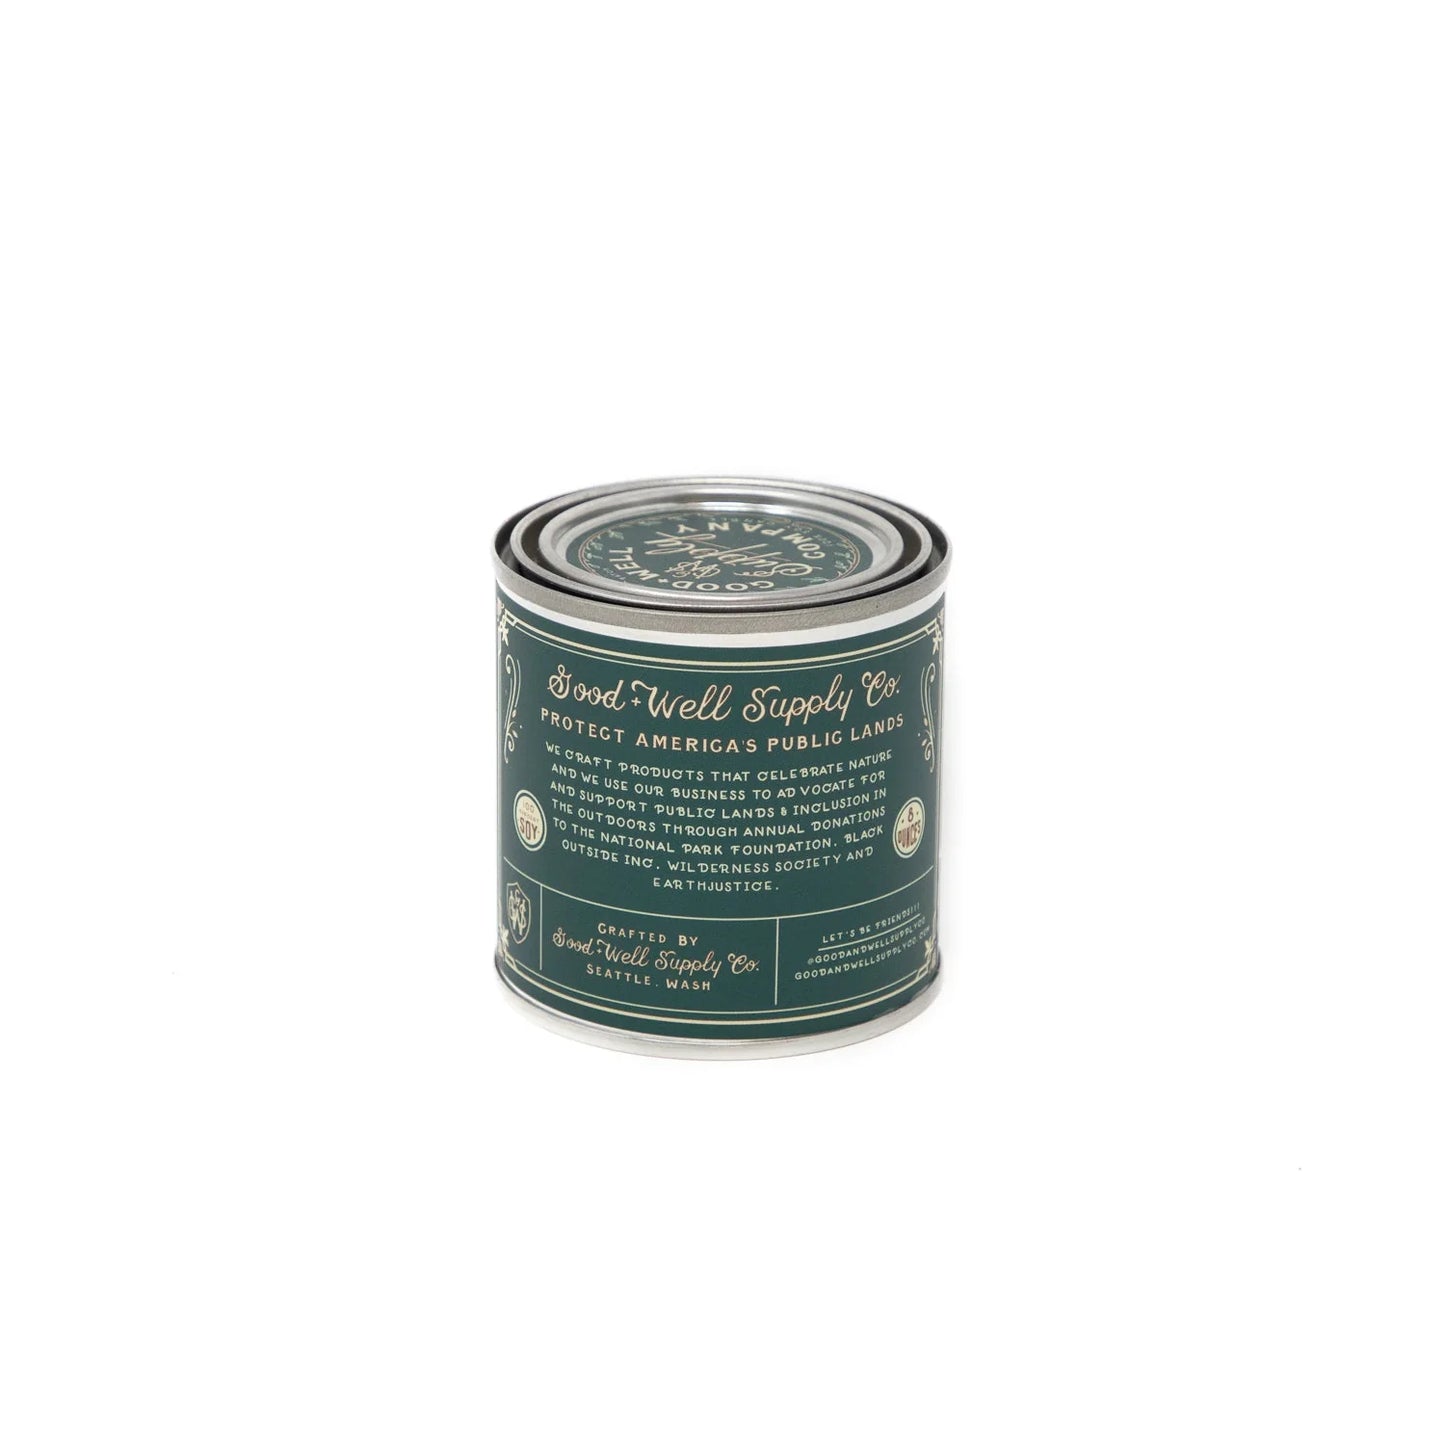 Good and Well Supply Co. Half Pint National Scenic Trails Candle Pacific Northwest